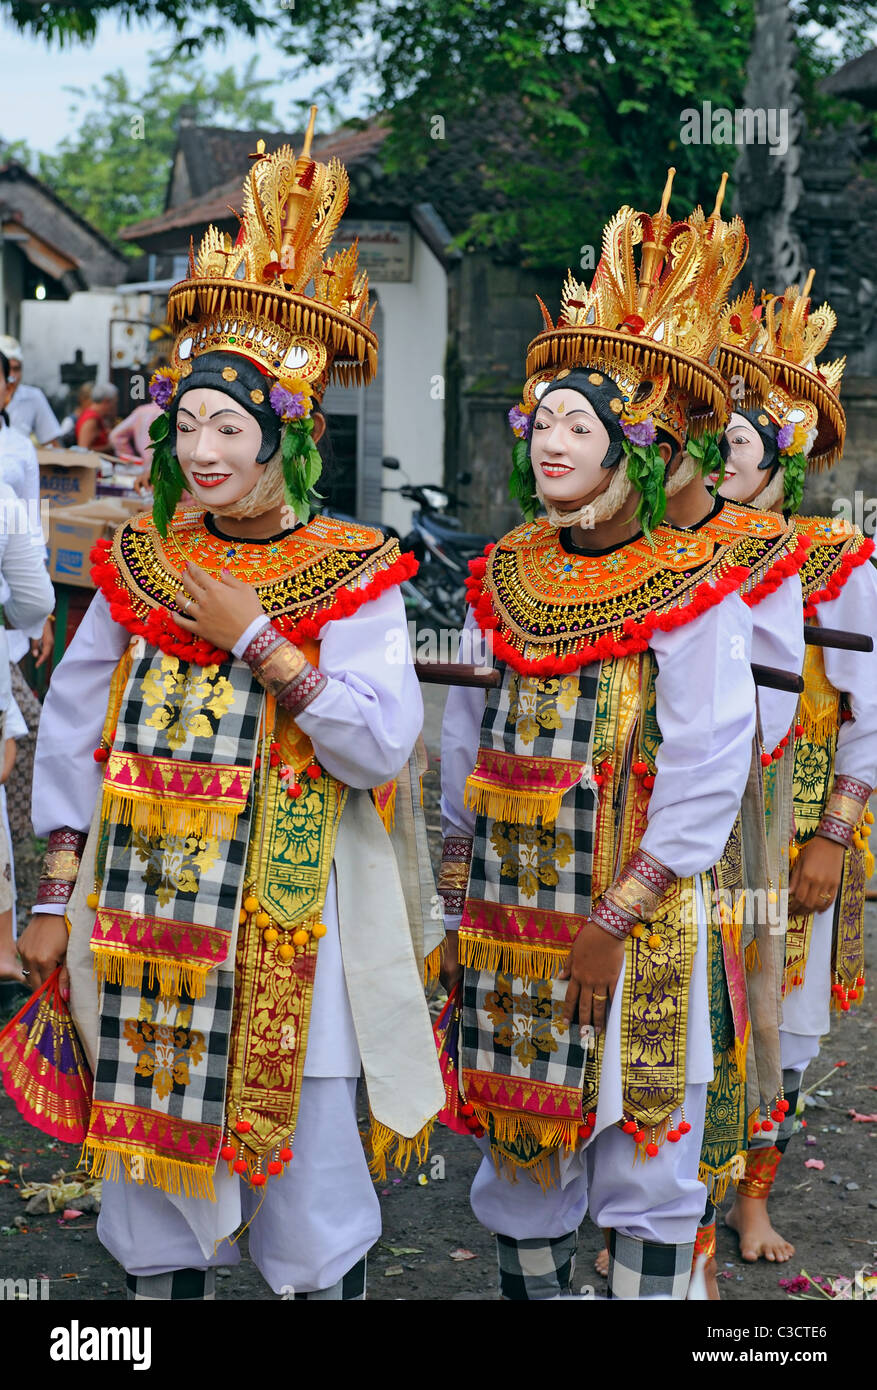 balinese dancers in colorful costumes and masks during a religious ceremony Stock Photo